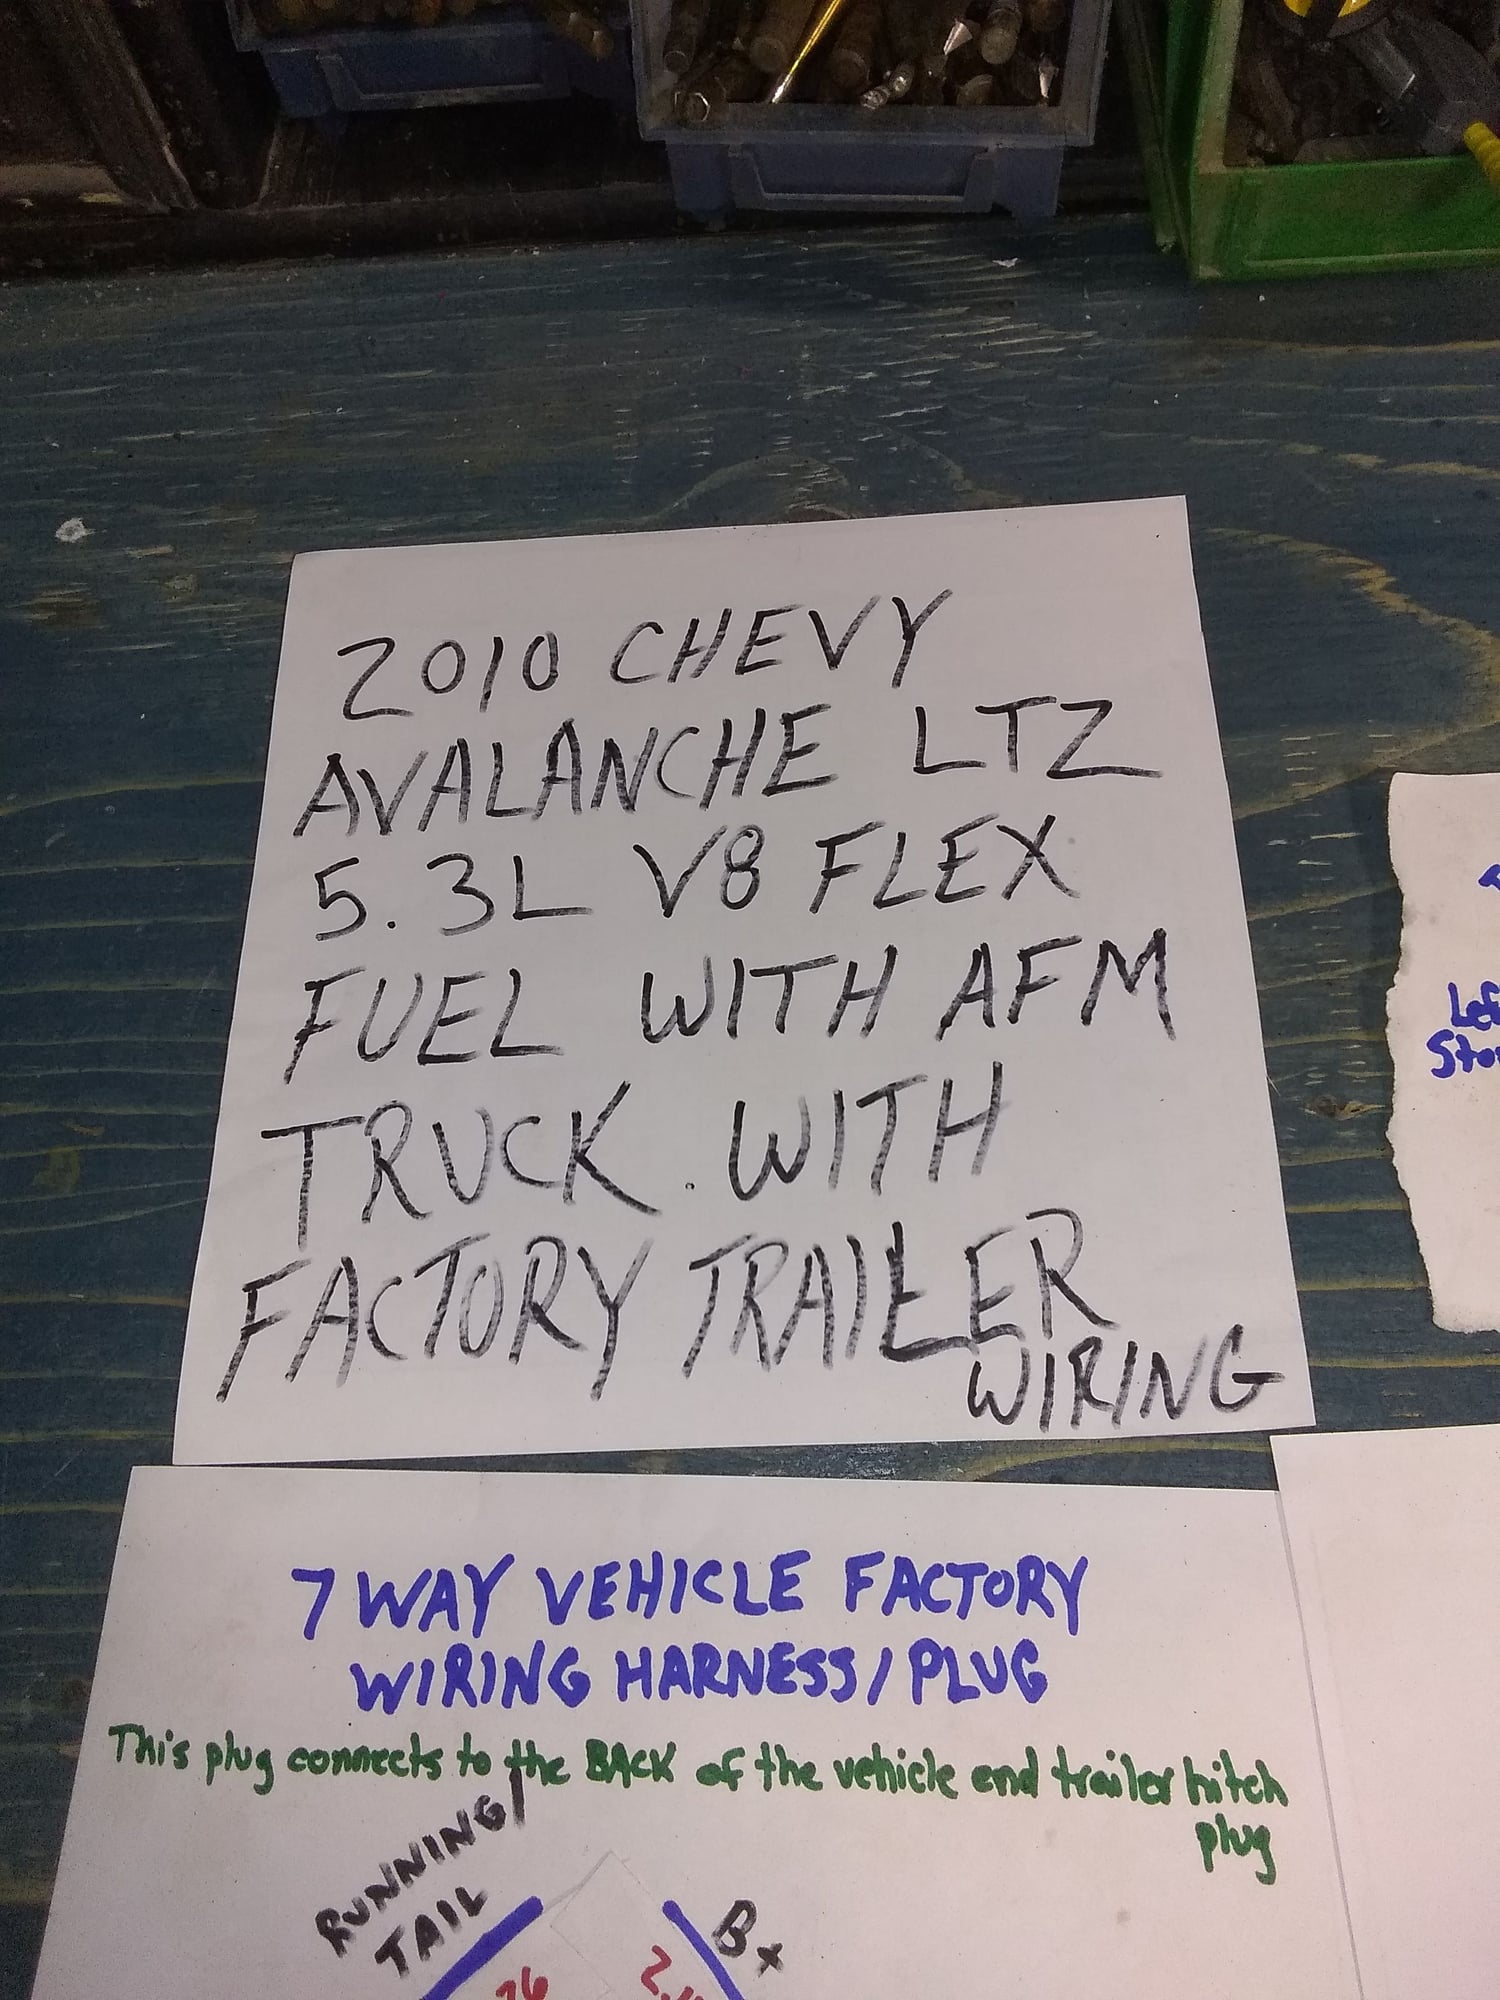 Truck/trailer wiring - Chevrolet Forum - Chevy Enthusiasts Forums